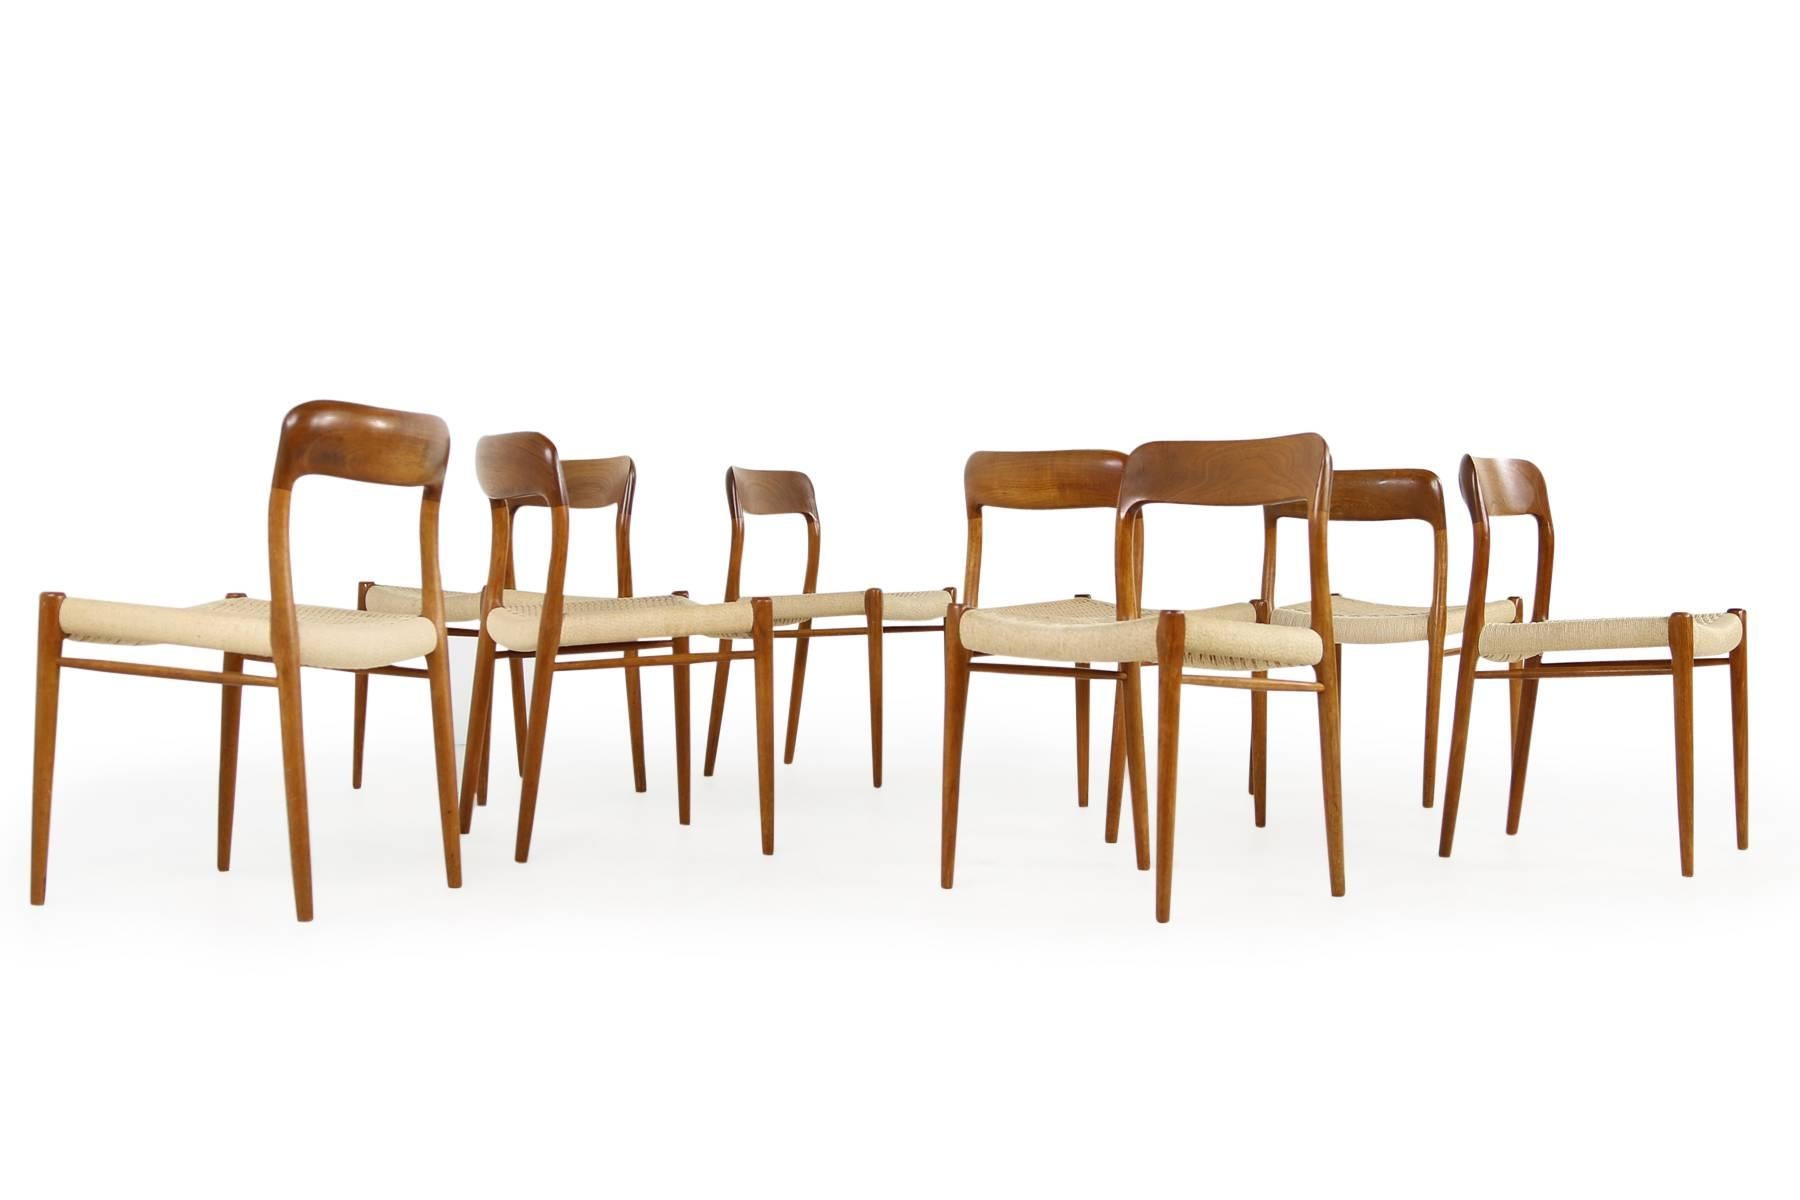 Eight 1960s Danish Teak and Cane Dining Room Chairs by Niels O. Moller Mod. 75 1